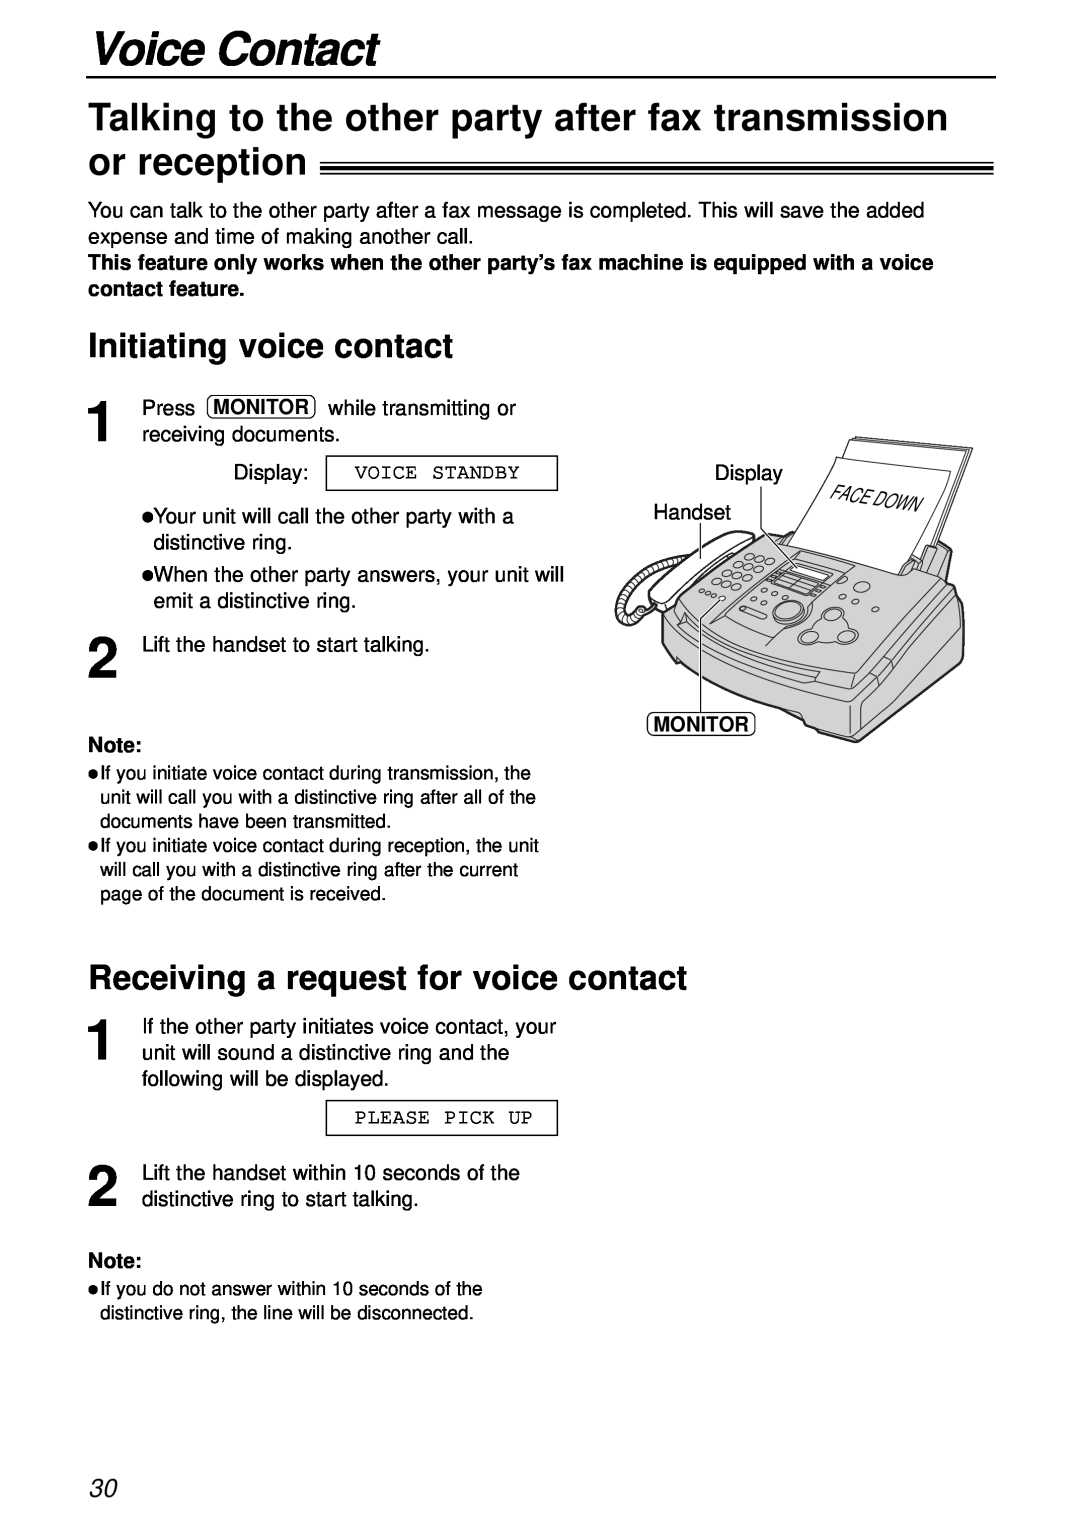 Panasonic KX-FL501 Voice Contact, Talking to the other party after fax transmission or reception, Initiating voice contact 